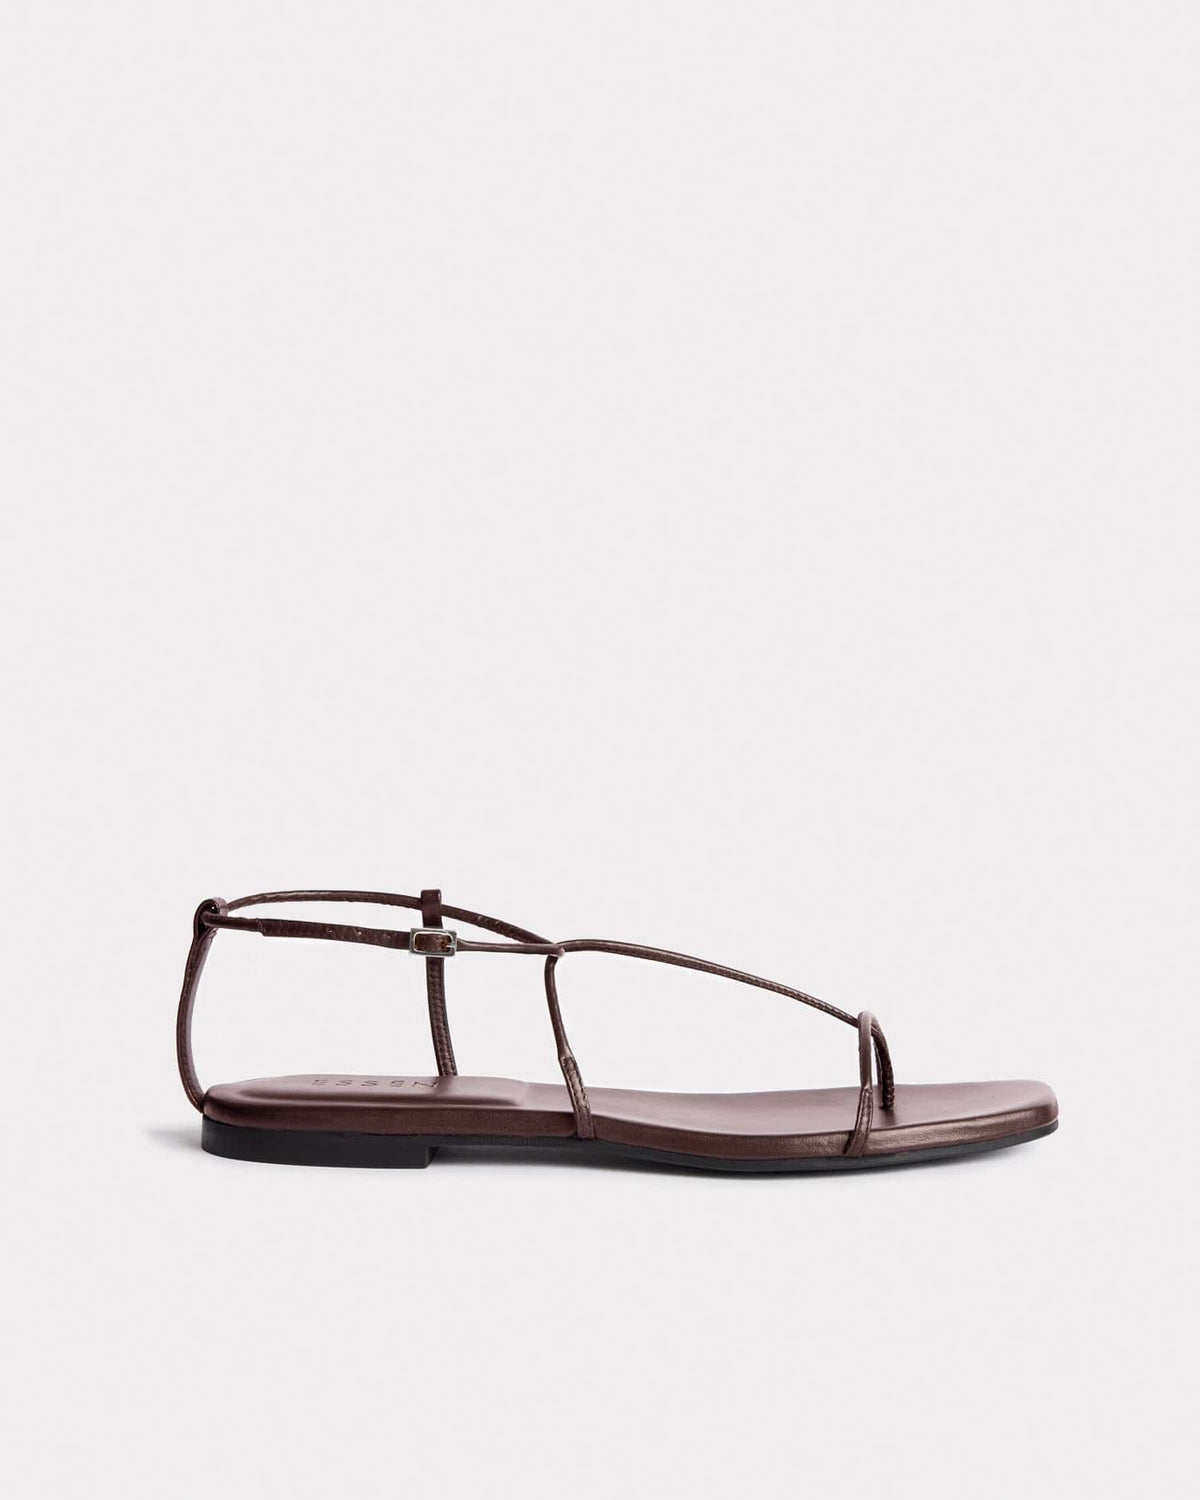 The Evening Sandal - Chocolate Sandals ESSĒN Brown Leather 35